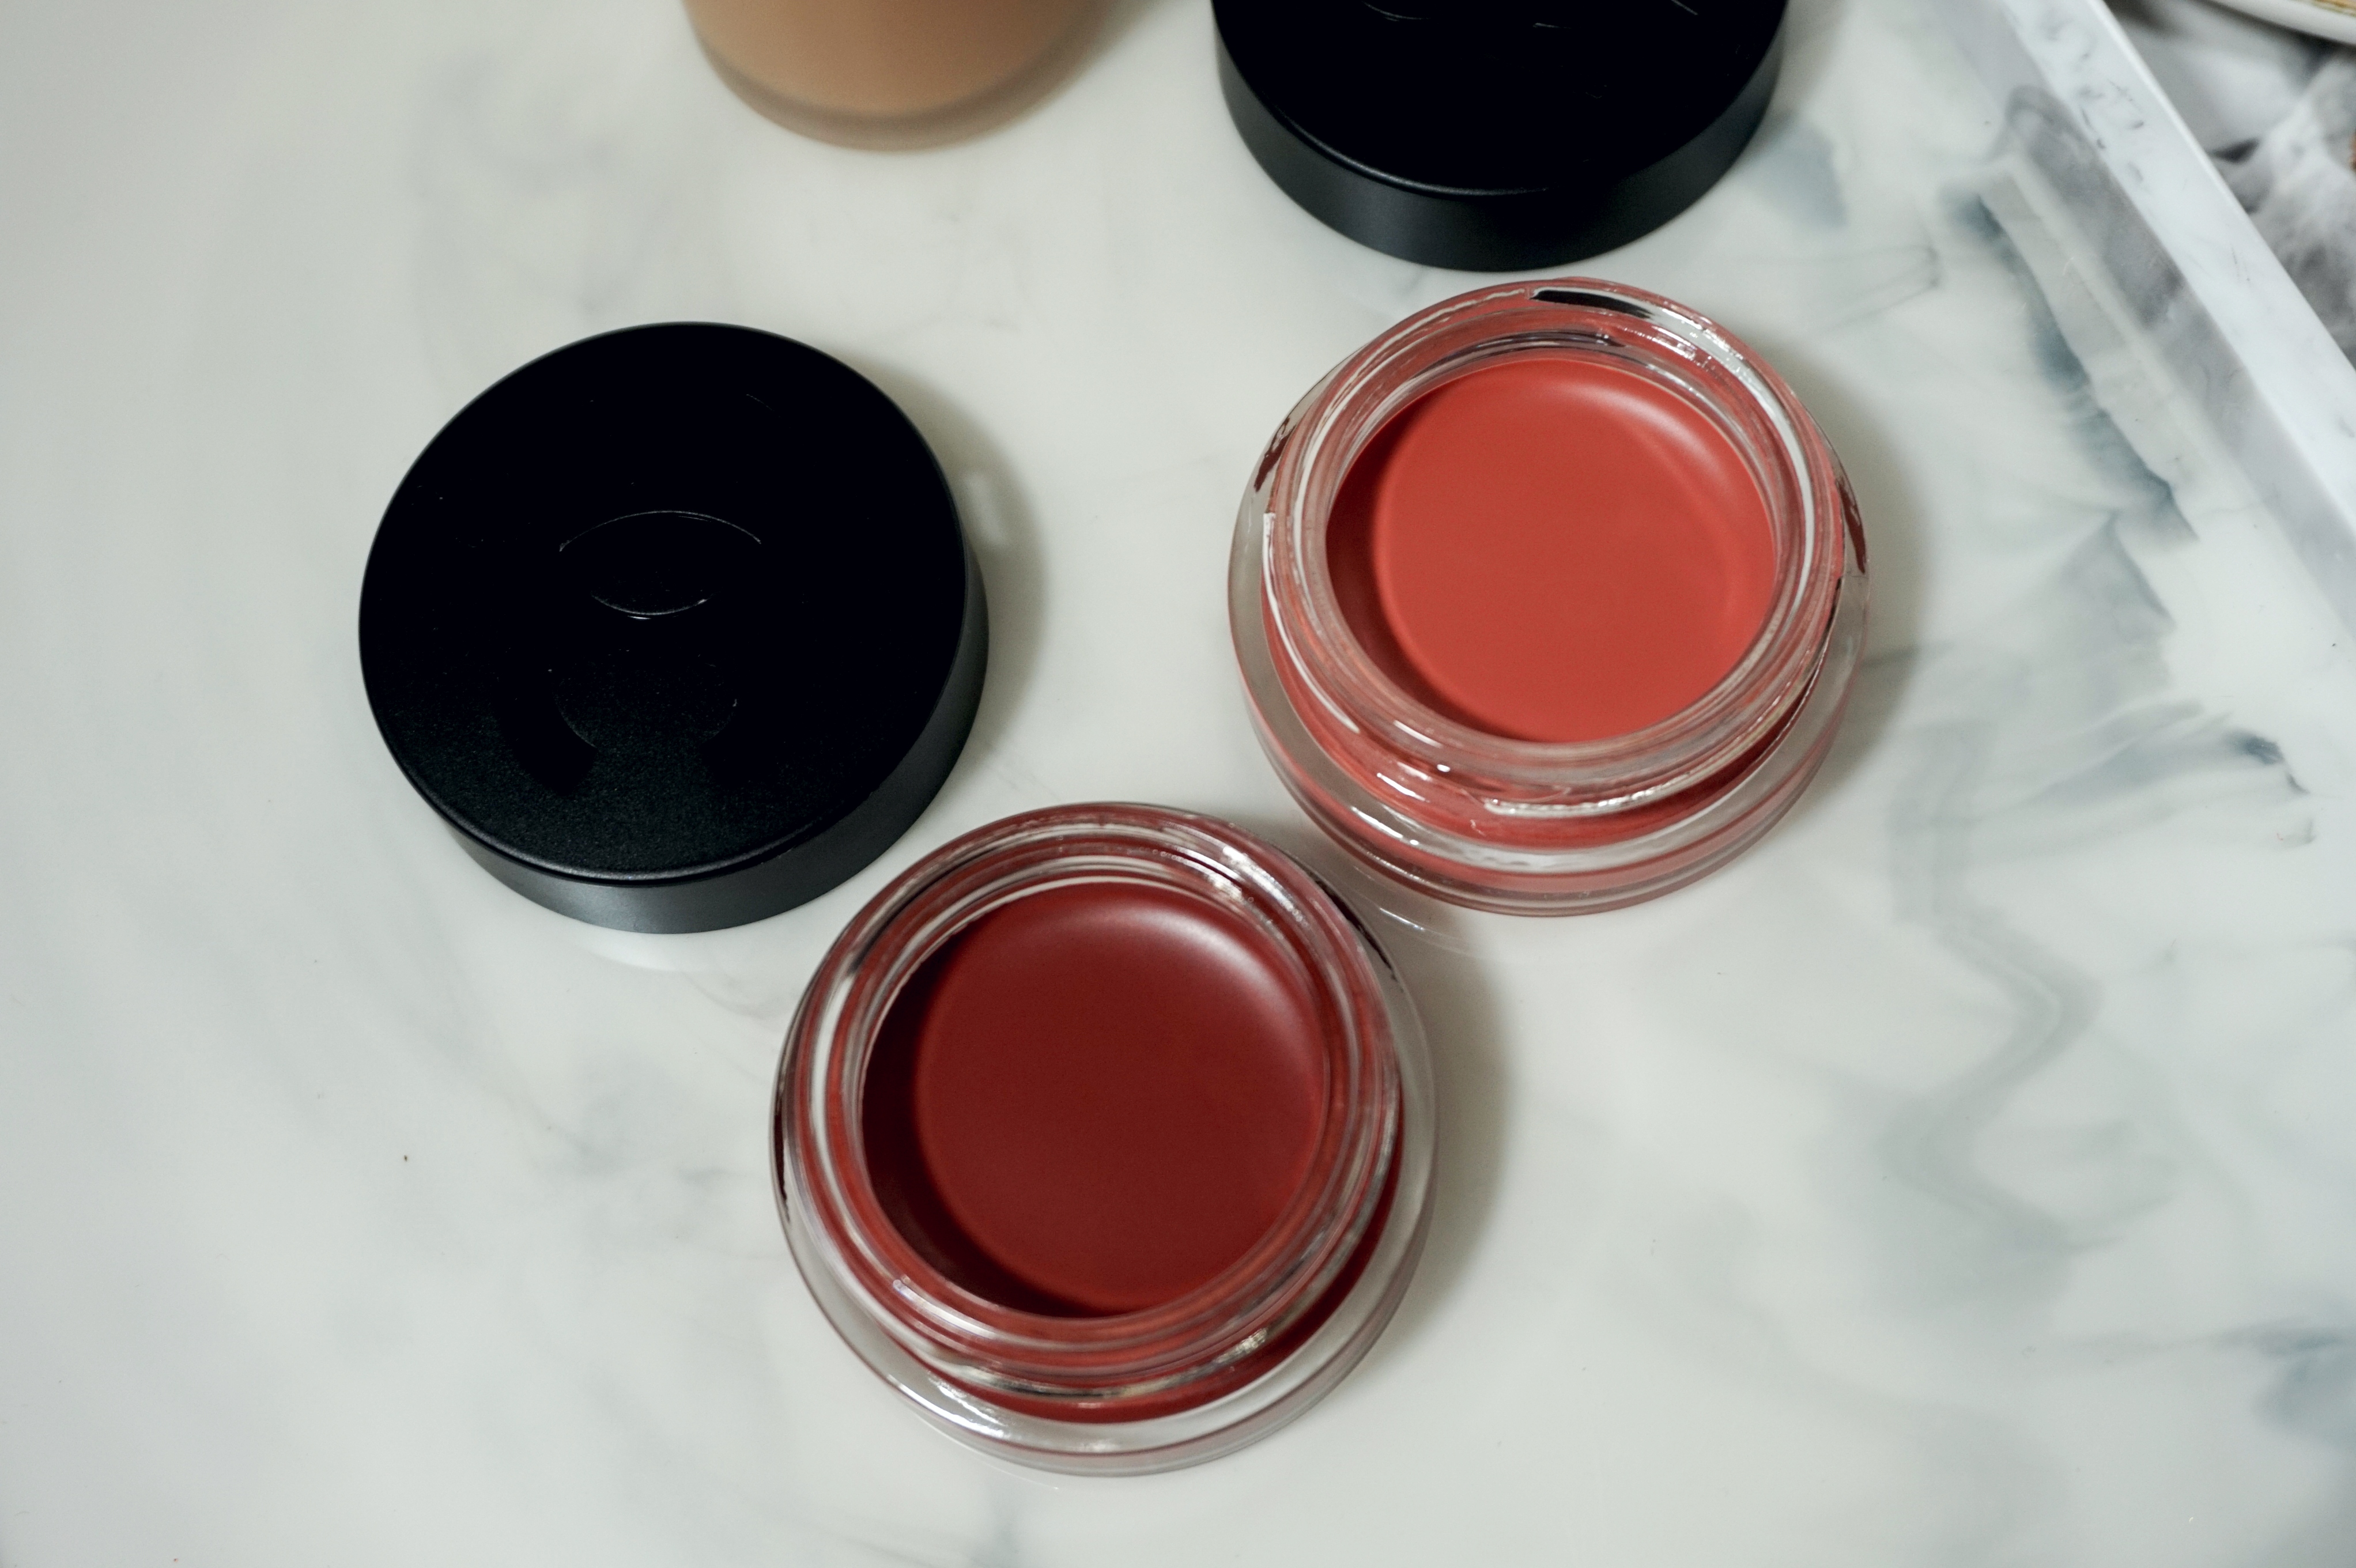 Chanel N°1 DE CHANEL Red Camellia Revitalizing Lip and Cheek Balm Review and Swatches